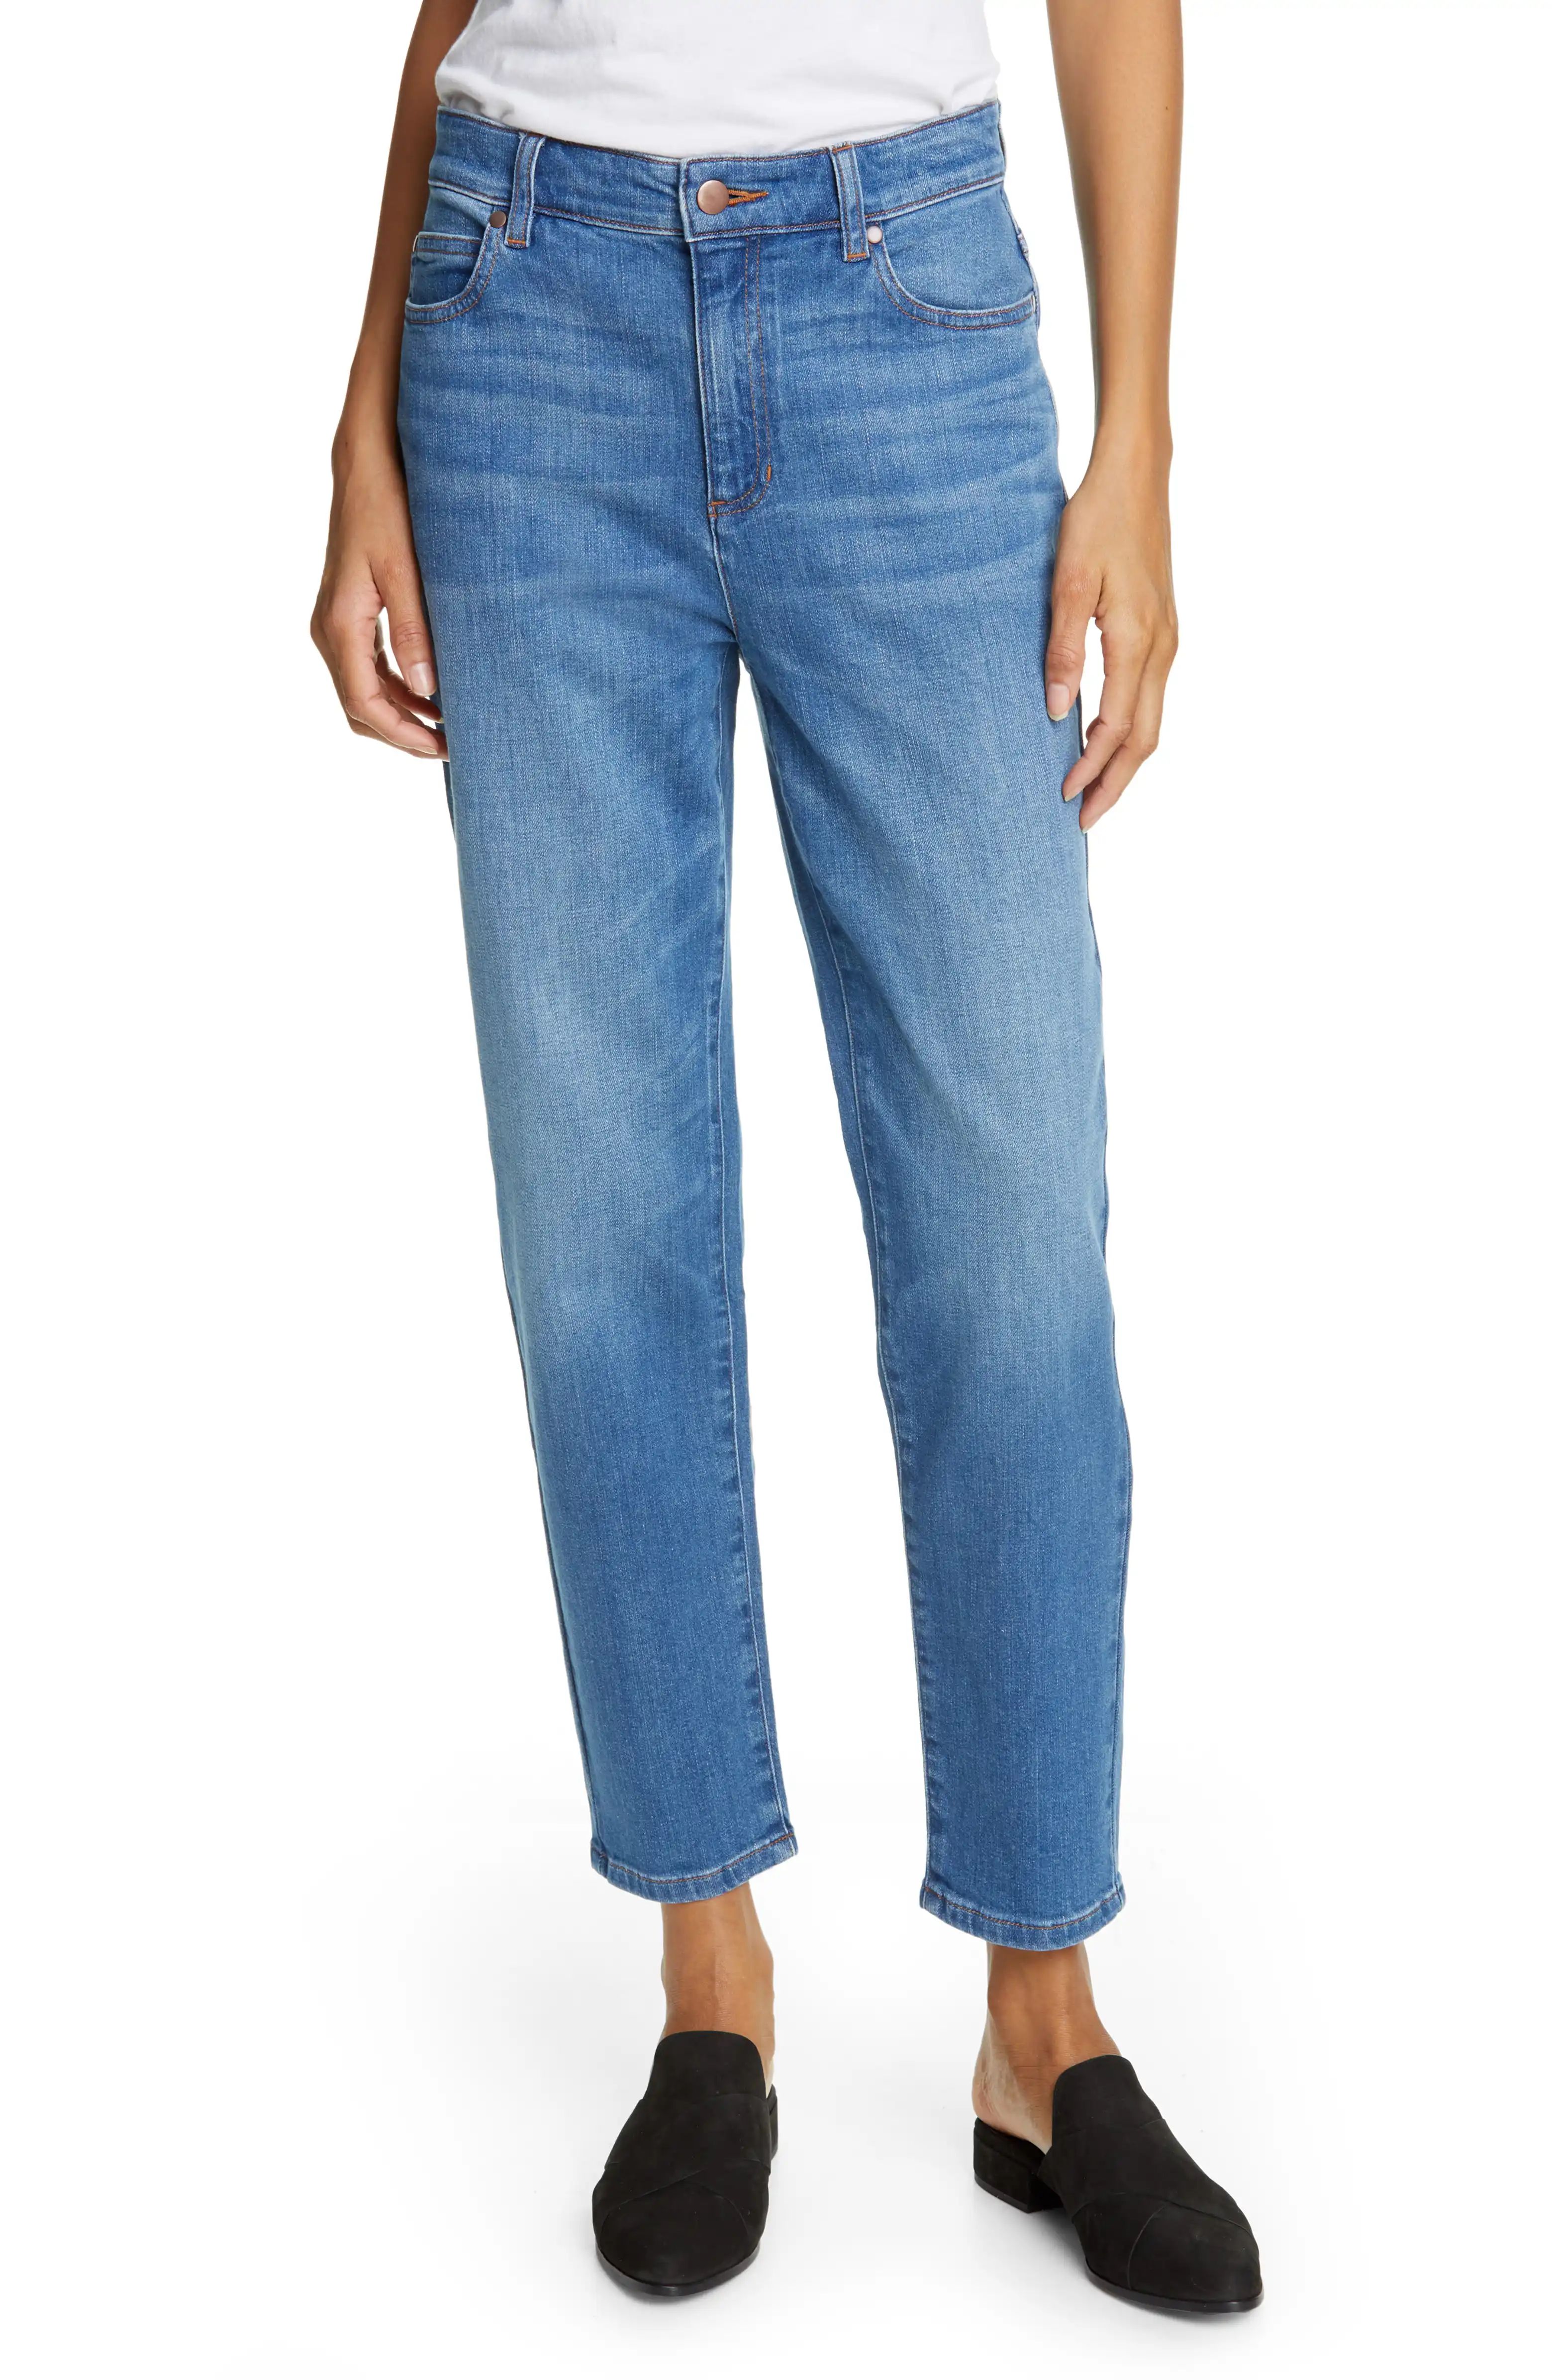 Rating 5out of5stars(2)2High Waist Tapered Ankle JeansEILEEN FISHER | Nordstrom